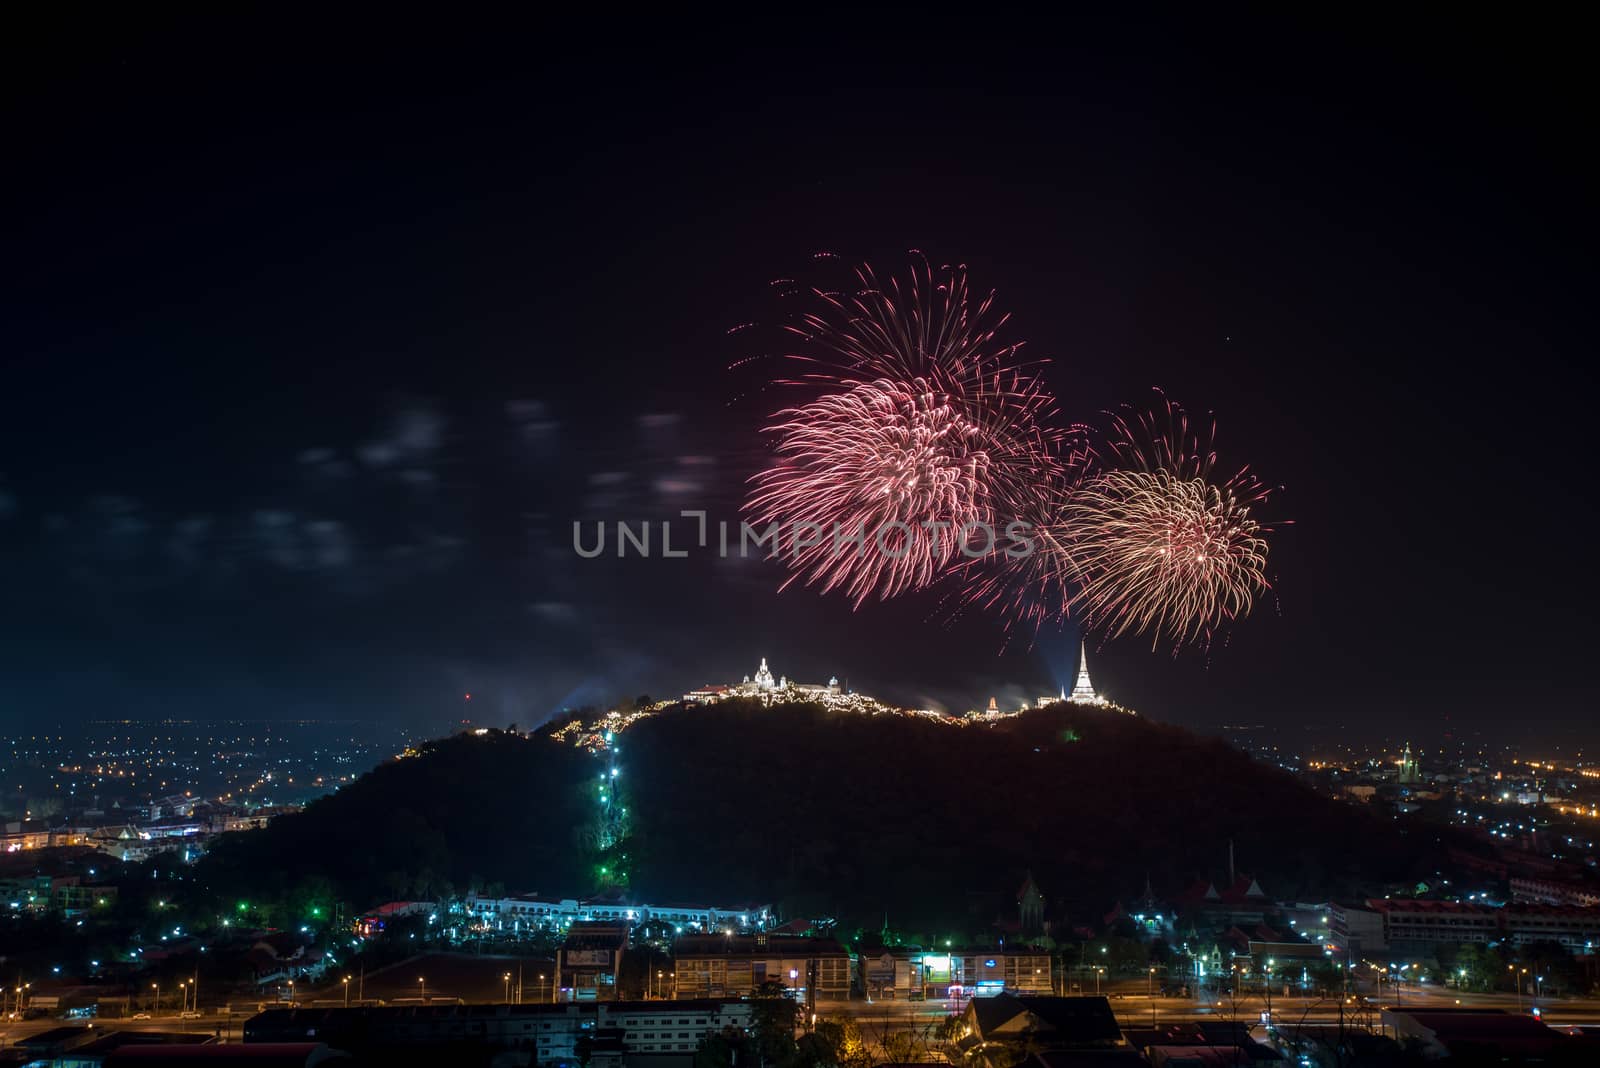 Fireworks show over Khao wang Historical Park, Petchaburi, thail by chanwity